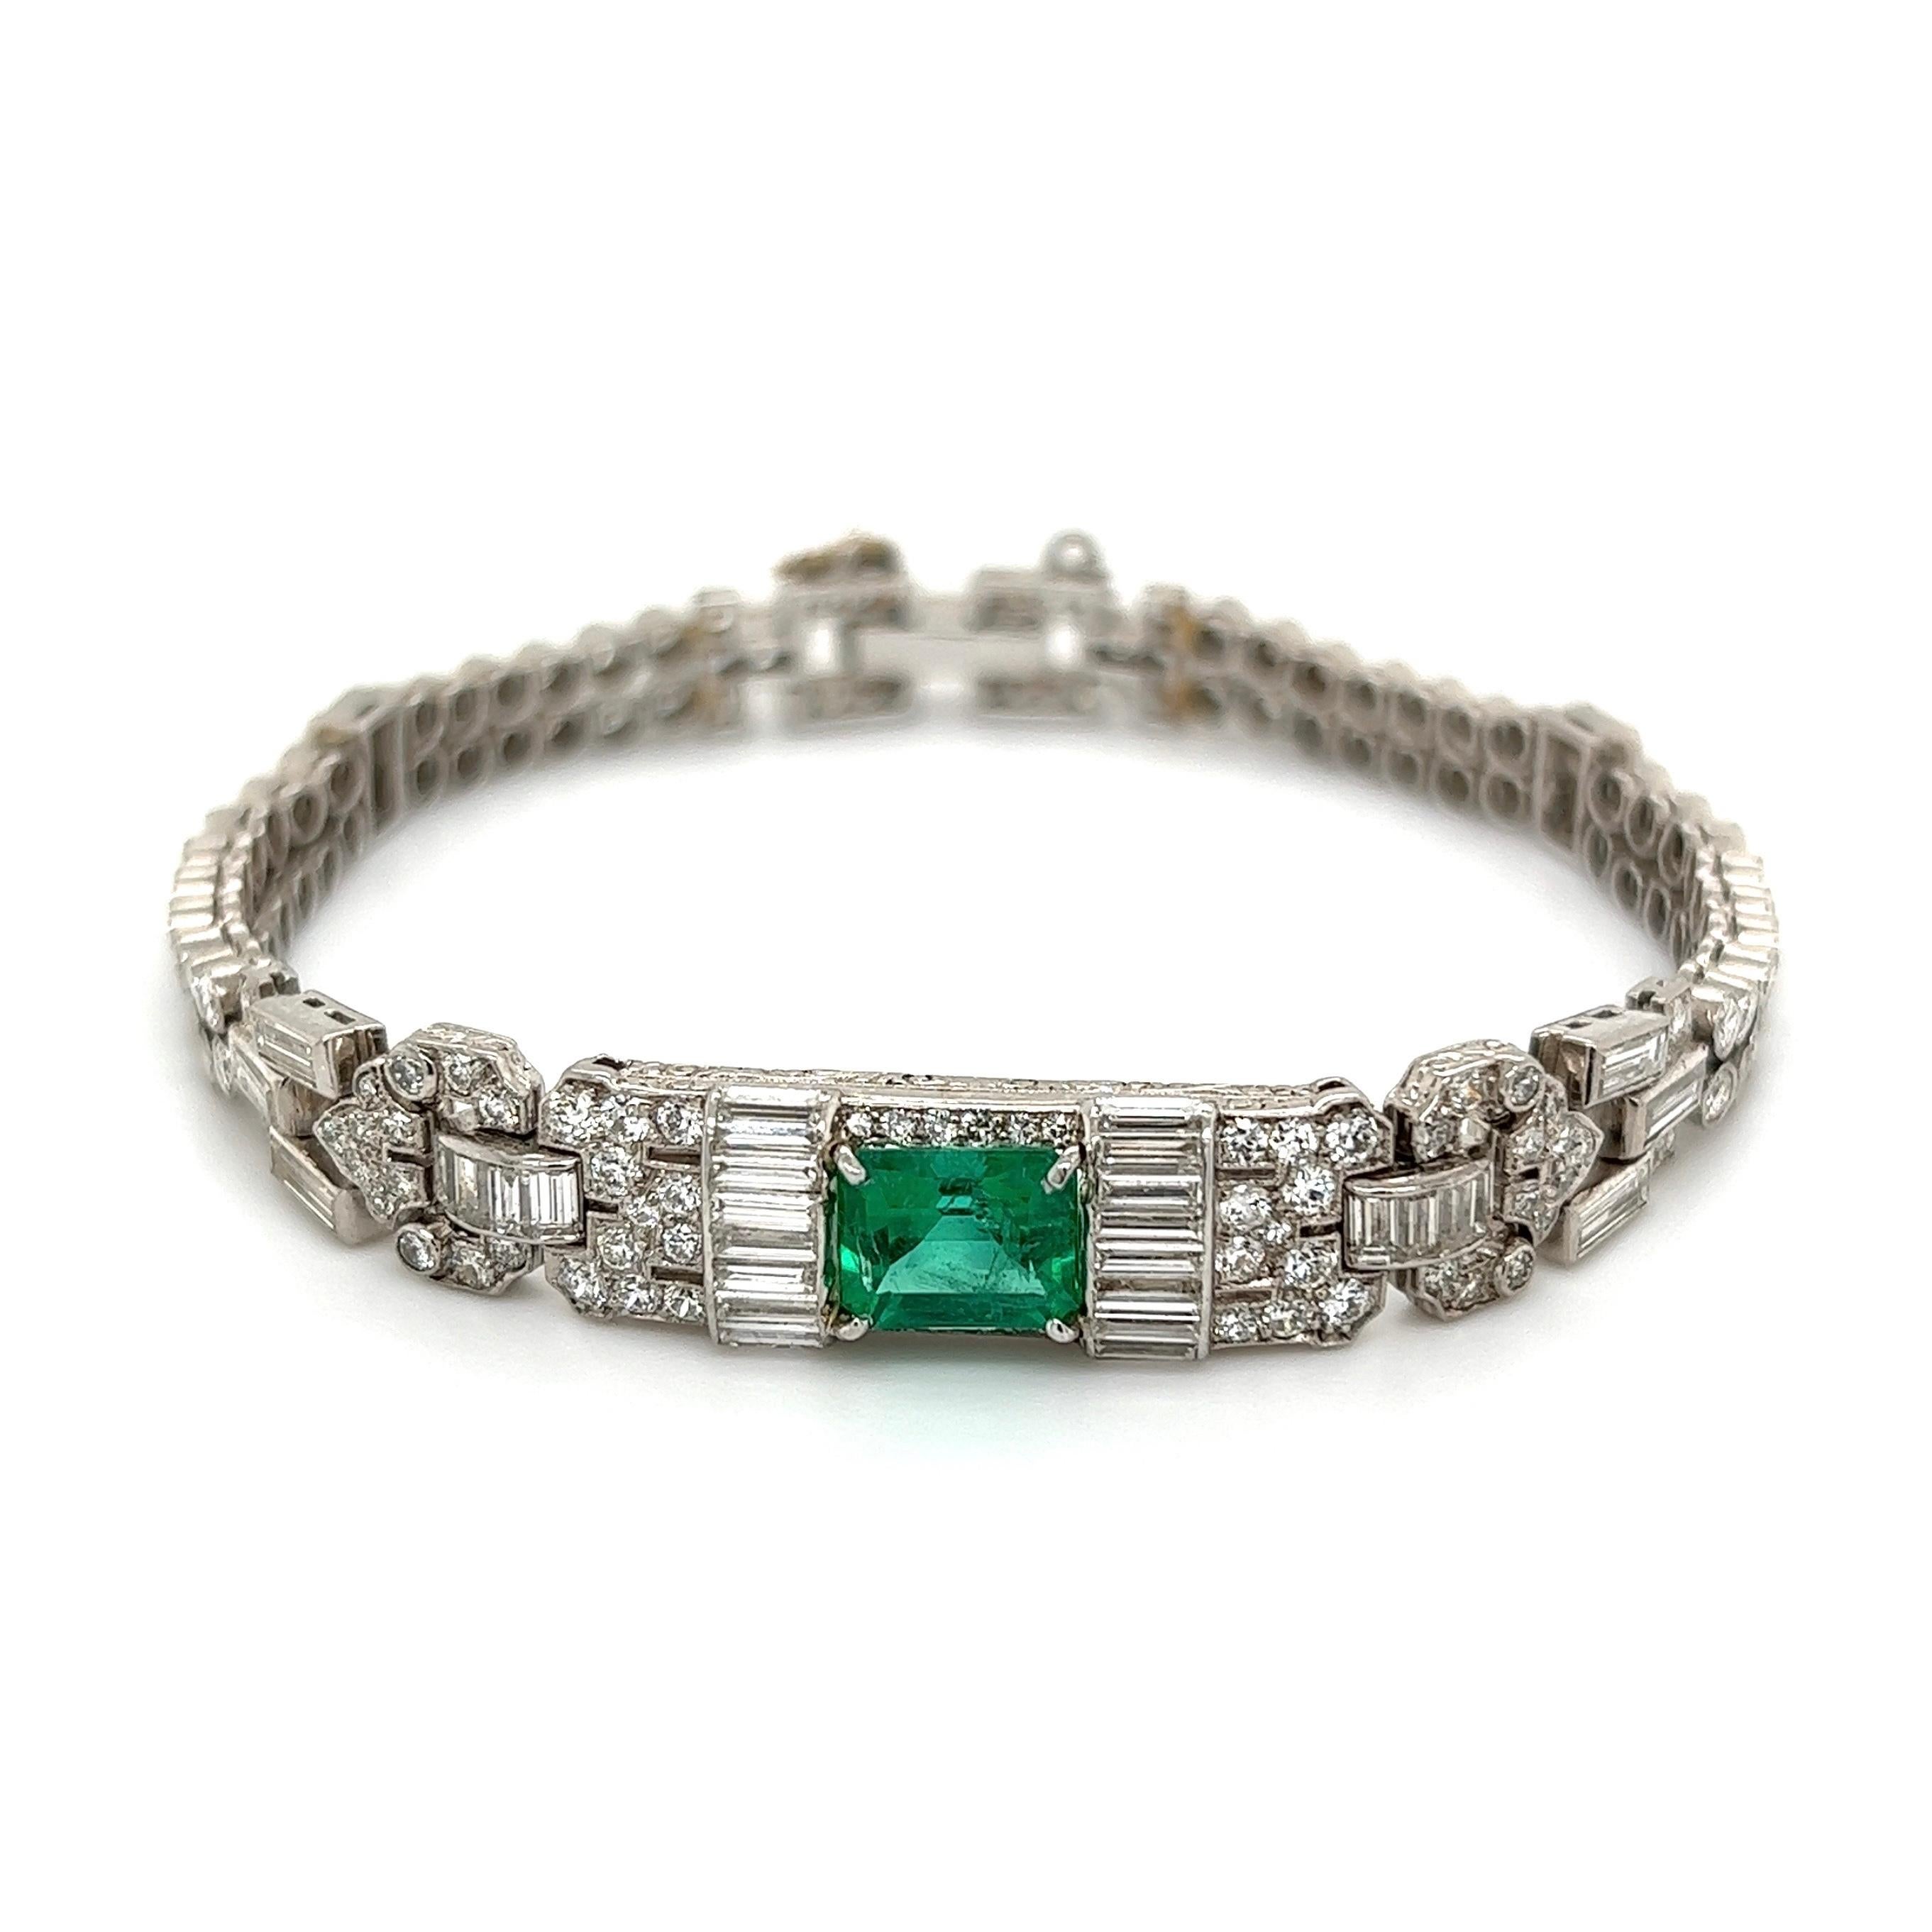 Simply Beautiful! Finely detailed Art Deco Diamond and Emerald Platinum Bracelet. Centering a securely nestled Hand set Emerald-cut Emerald weighing approx. 1.25 Carat surrounded by Diamonds approx. 9.00tcw. Hand crafted Platinum mounting. Bracelet